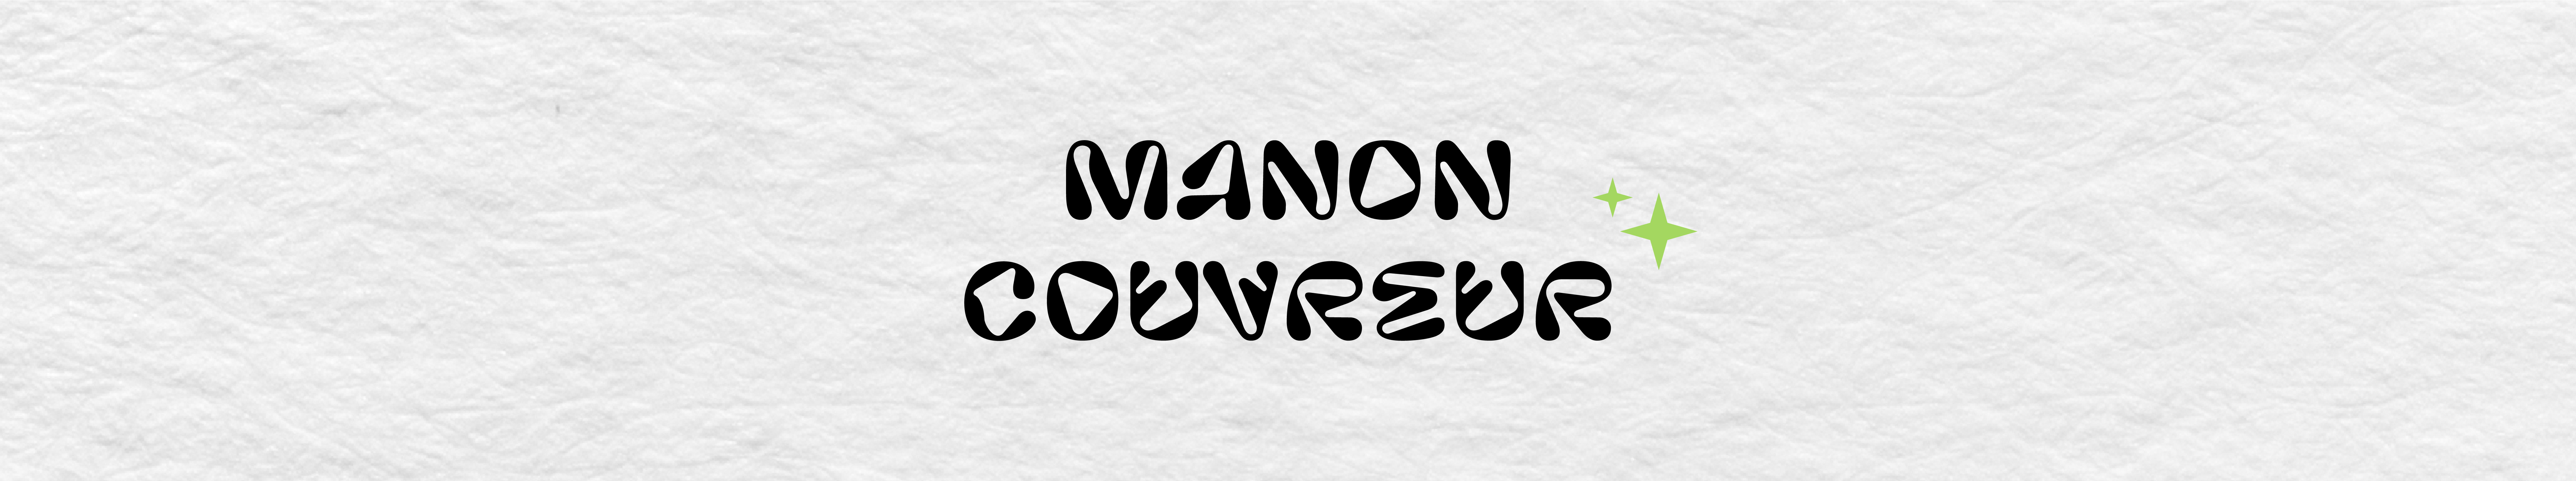 Manon Couvreur's profile banner